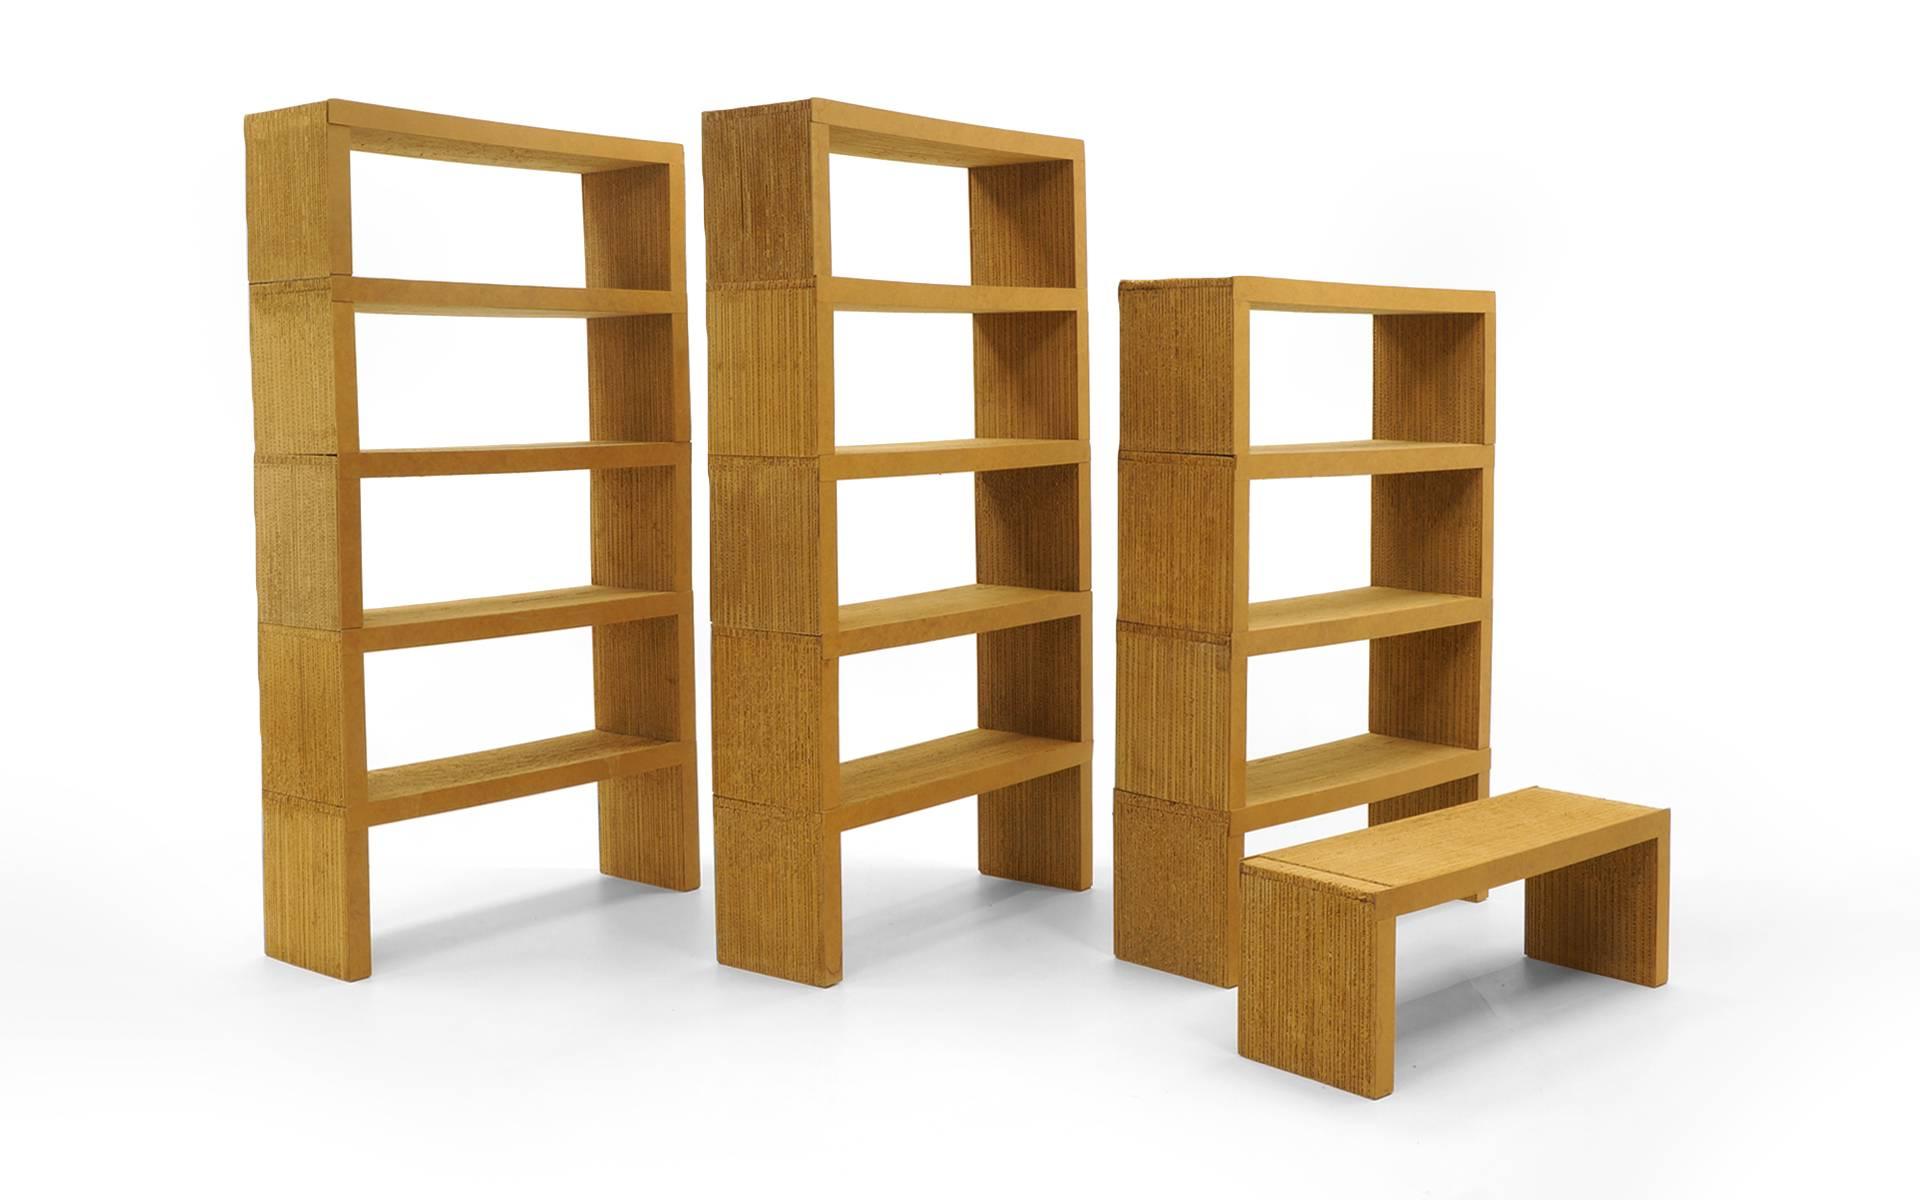 Large set of cardboard bookshelves designed by Frank Gehry for Easy Edges. These are all original, not the Vitra reissue. Overall very good to excellent condition. There are a few signs of wear and discoloration but no significant distractions. Look